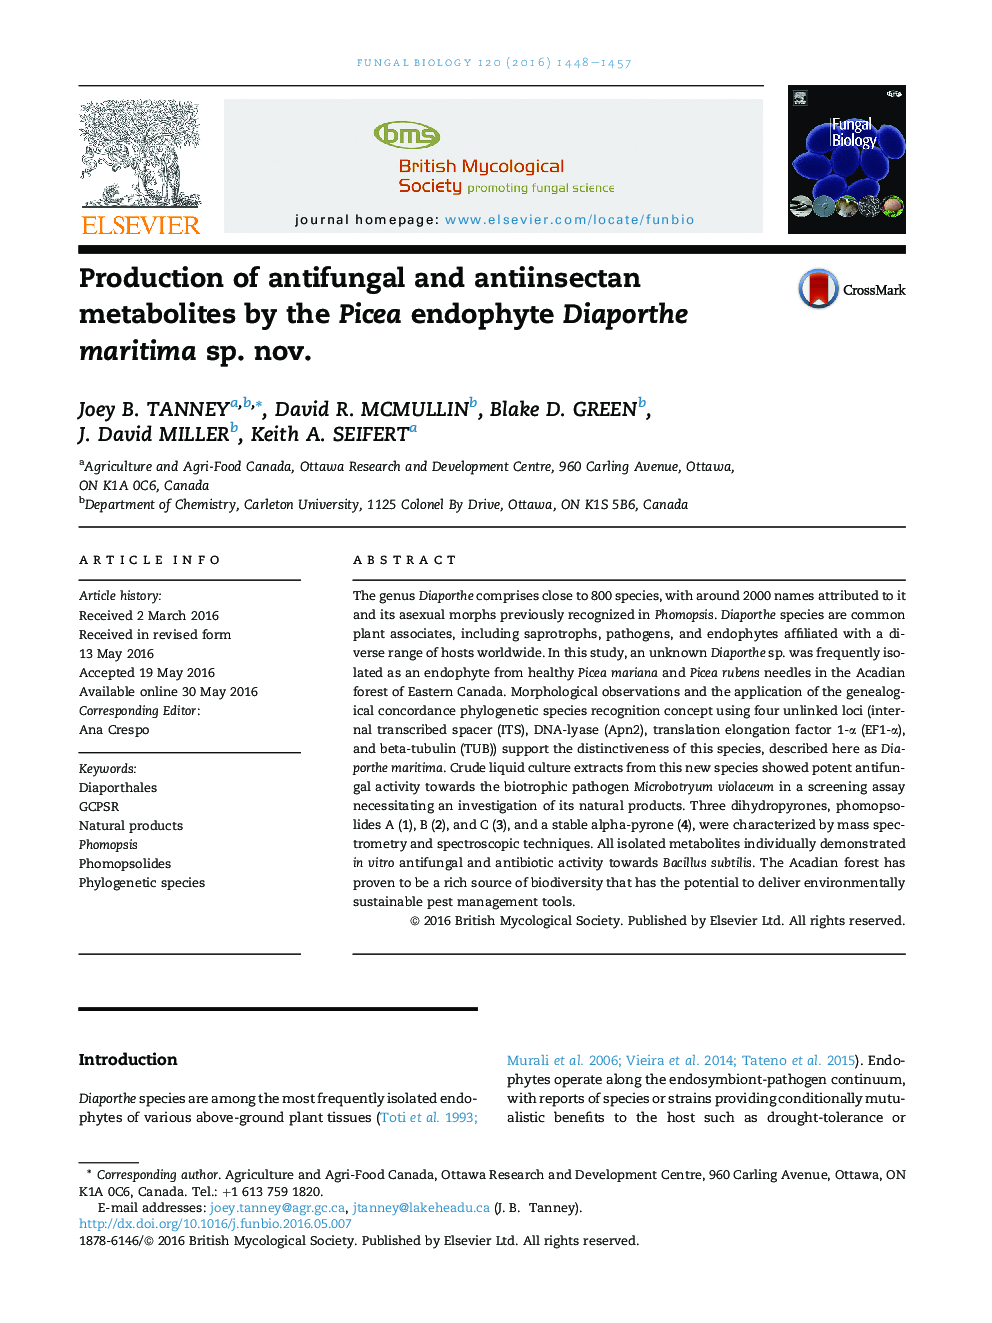 Production of antifungal and antiinsectan metabolites by the Picea endophyte Diaporthe maritima sp. nov.